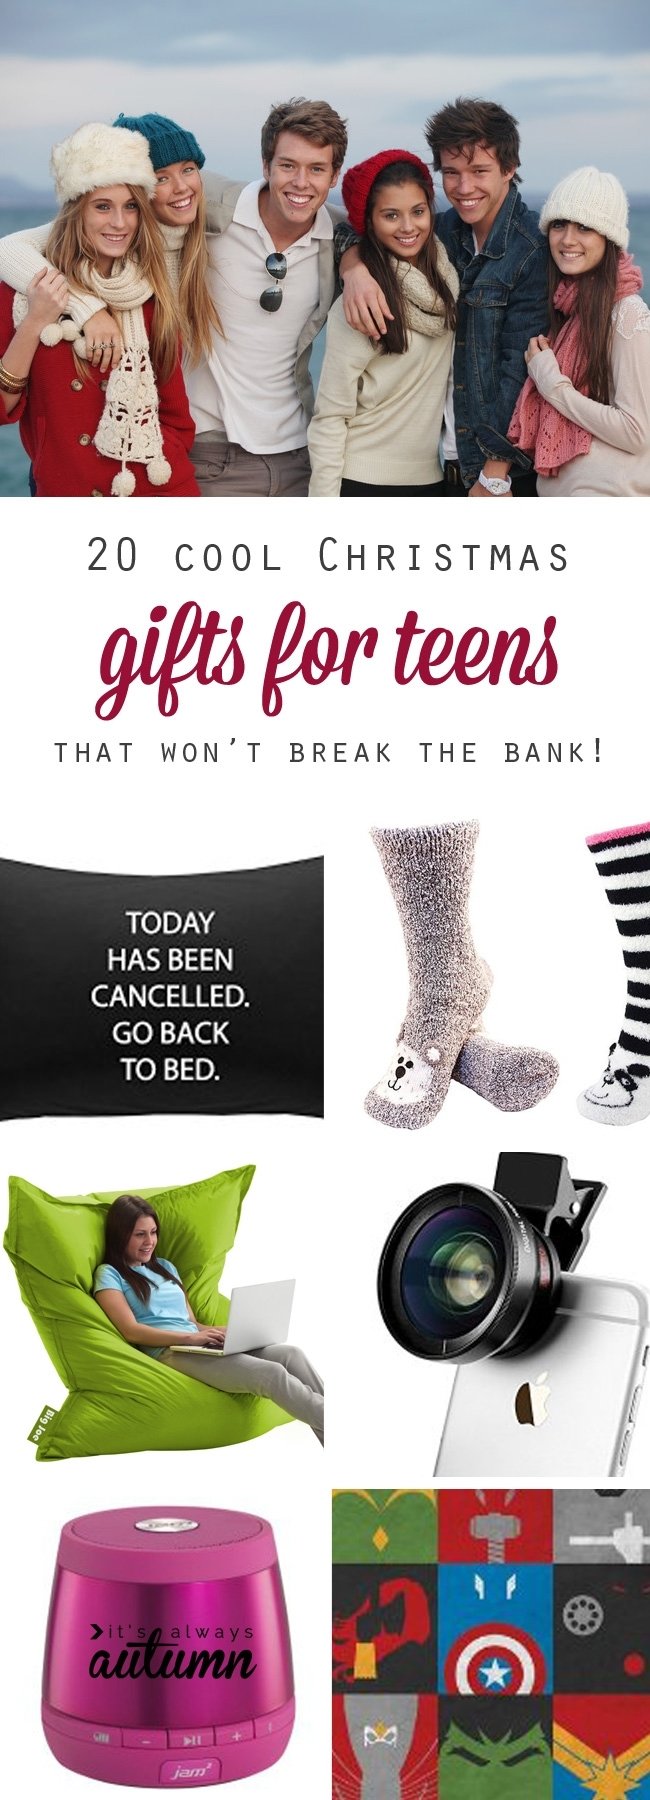 10 Amazing Christmas Gift Ideas For Teenagers best christmas gift ideas for teens its always autumn 10 2022